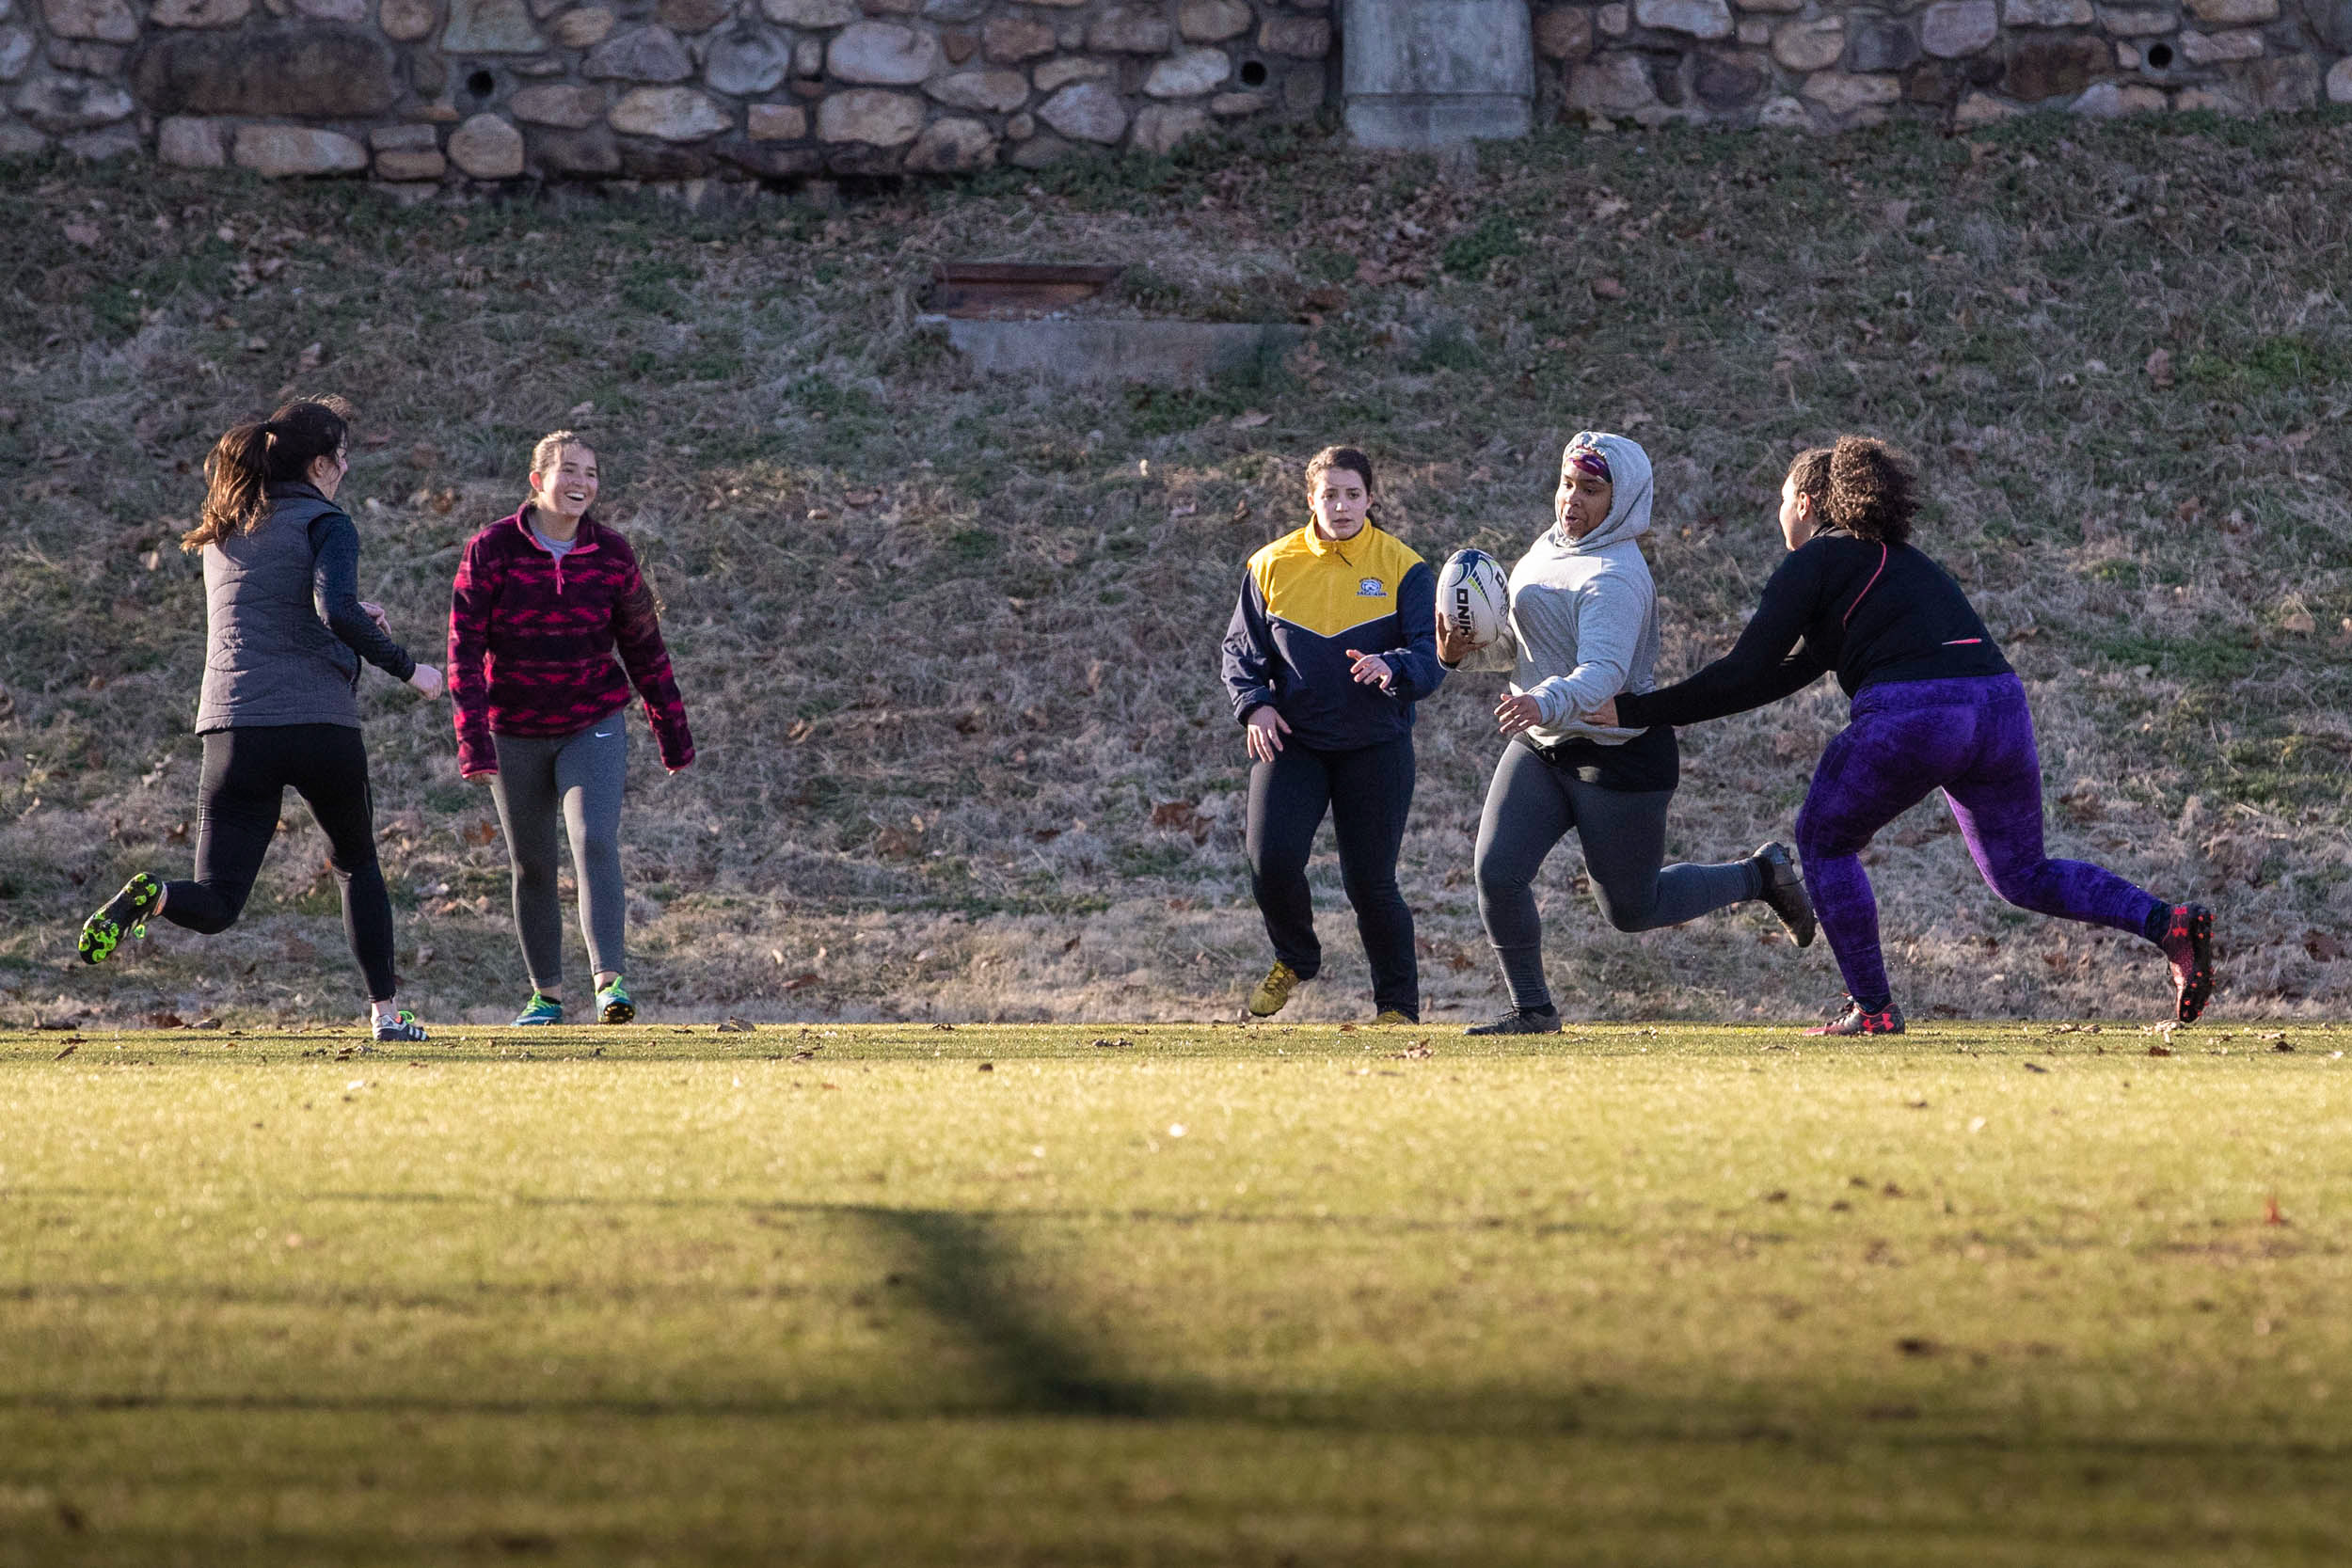 Robinson, second from right, playing rugby with some other women